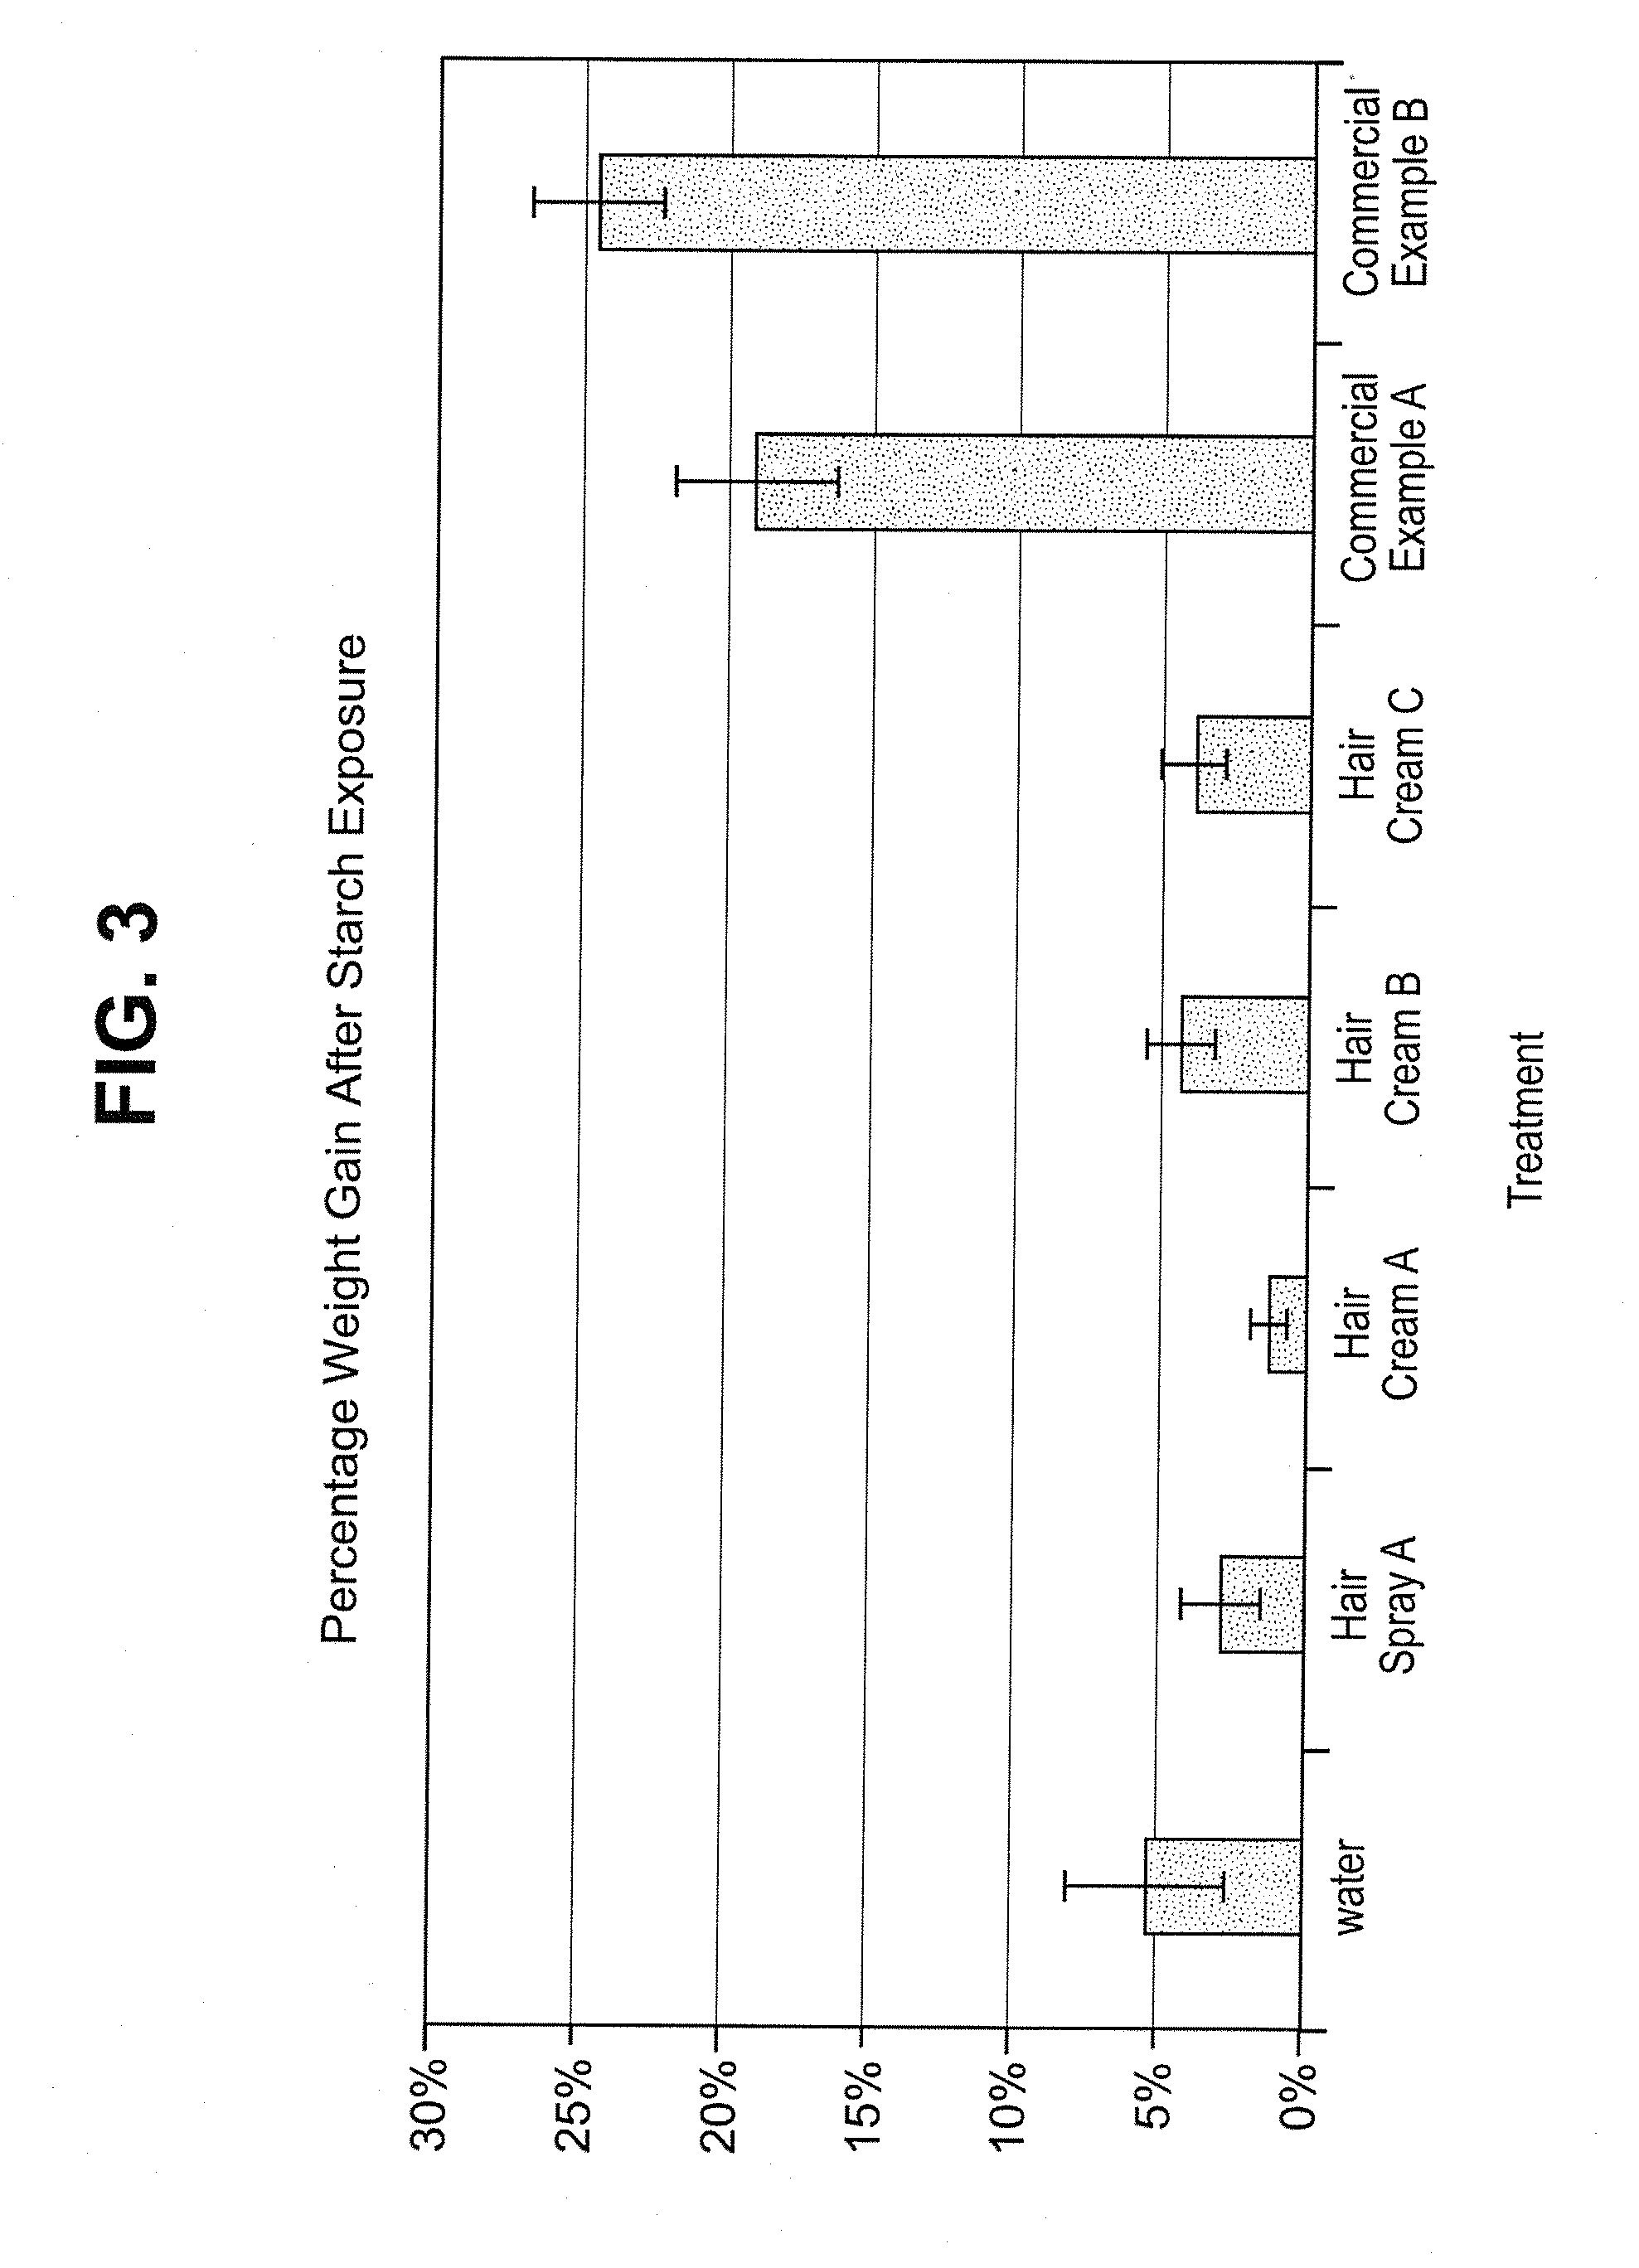 Hair care compositions and methods of treating hair